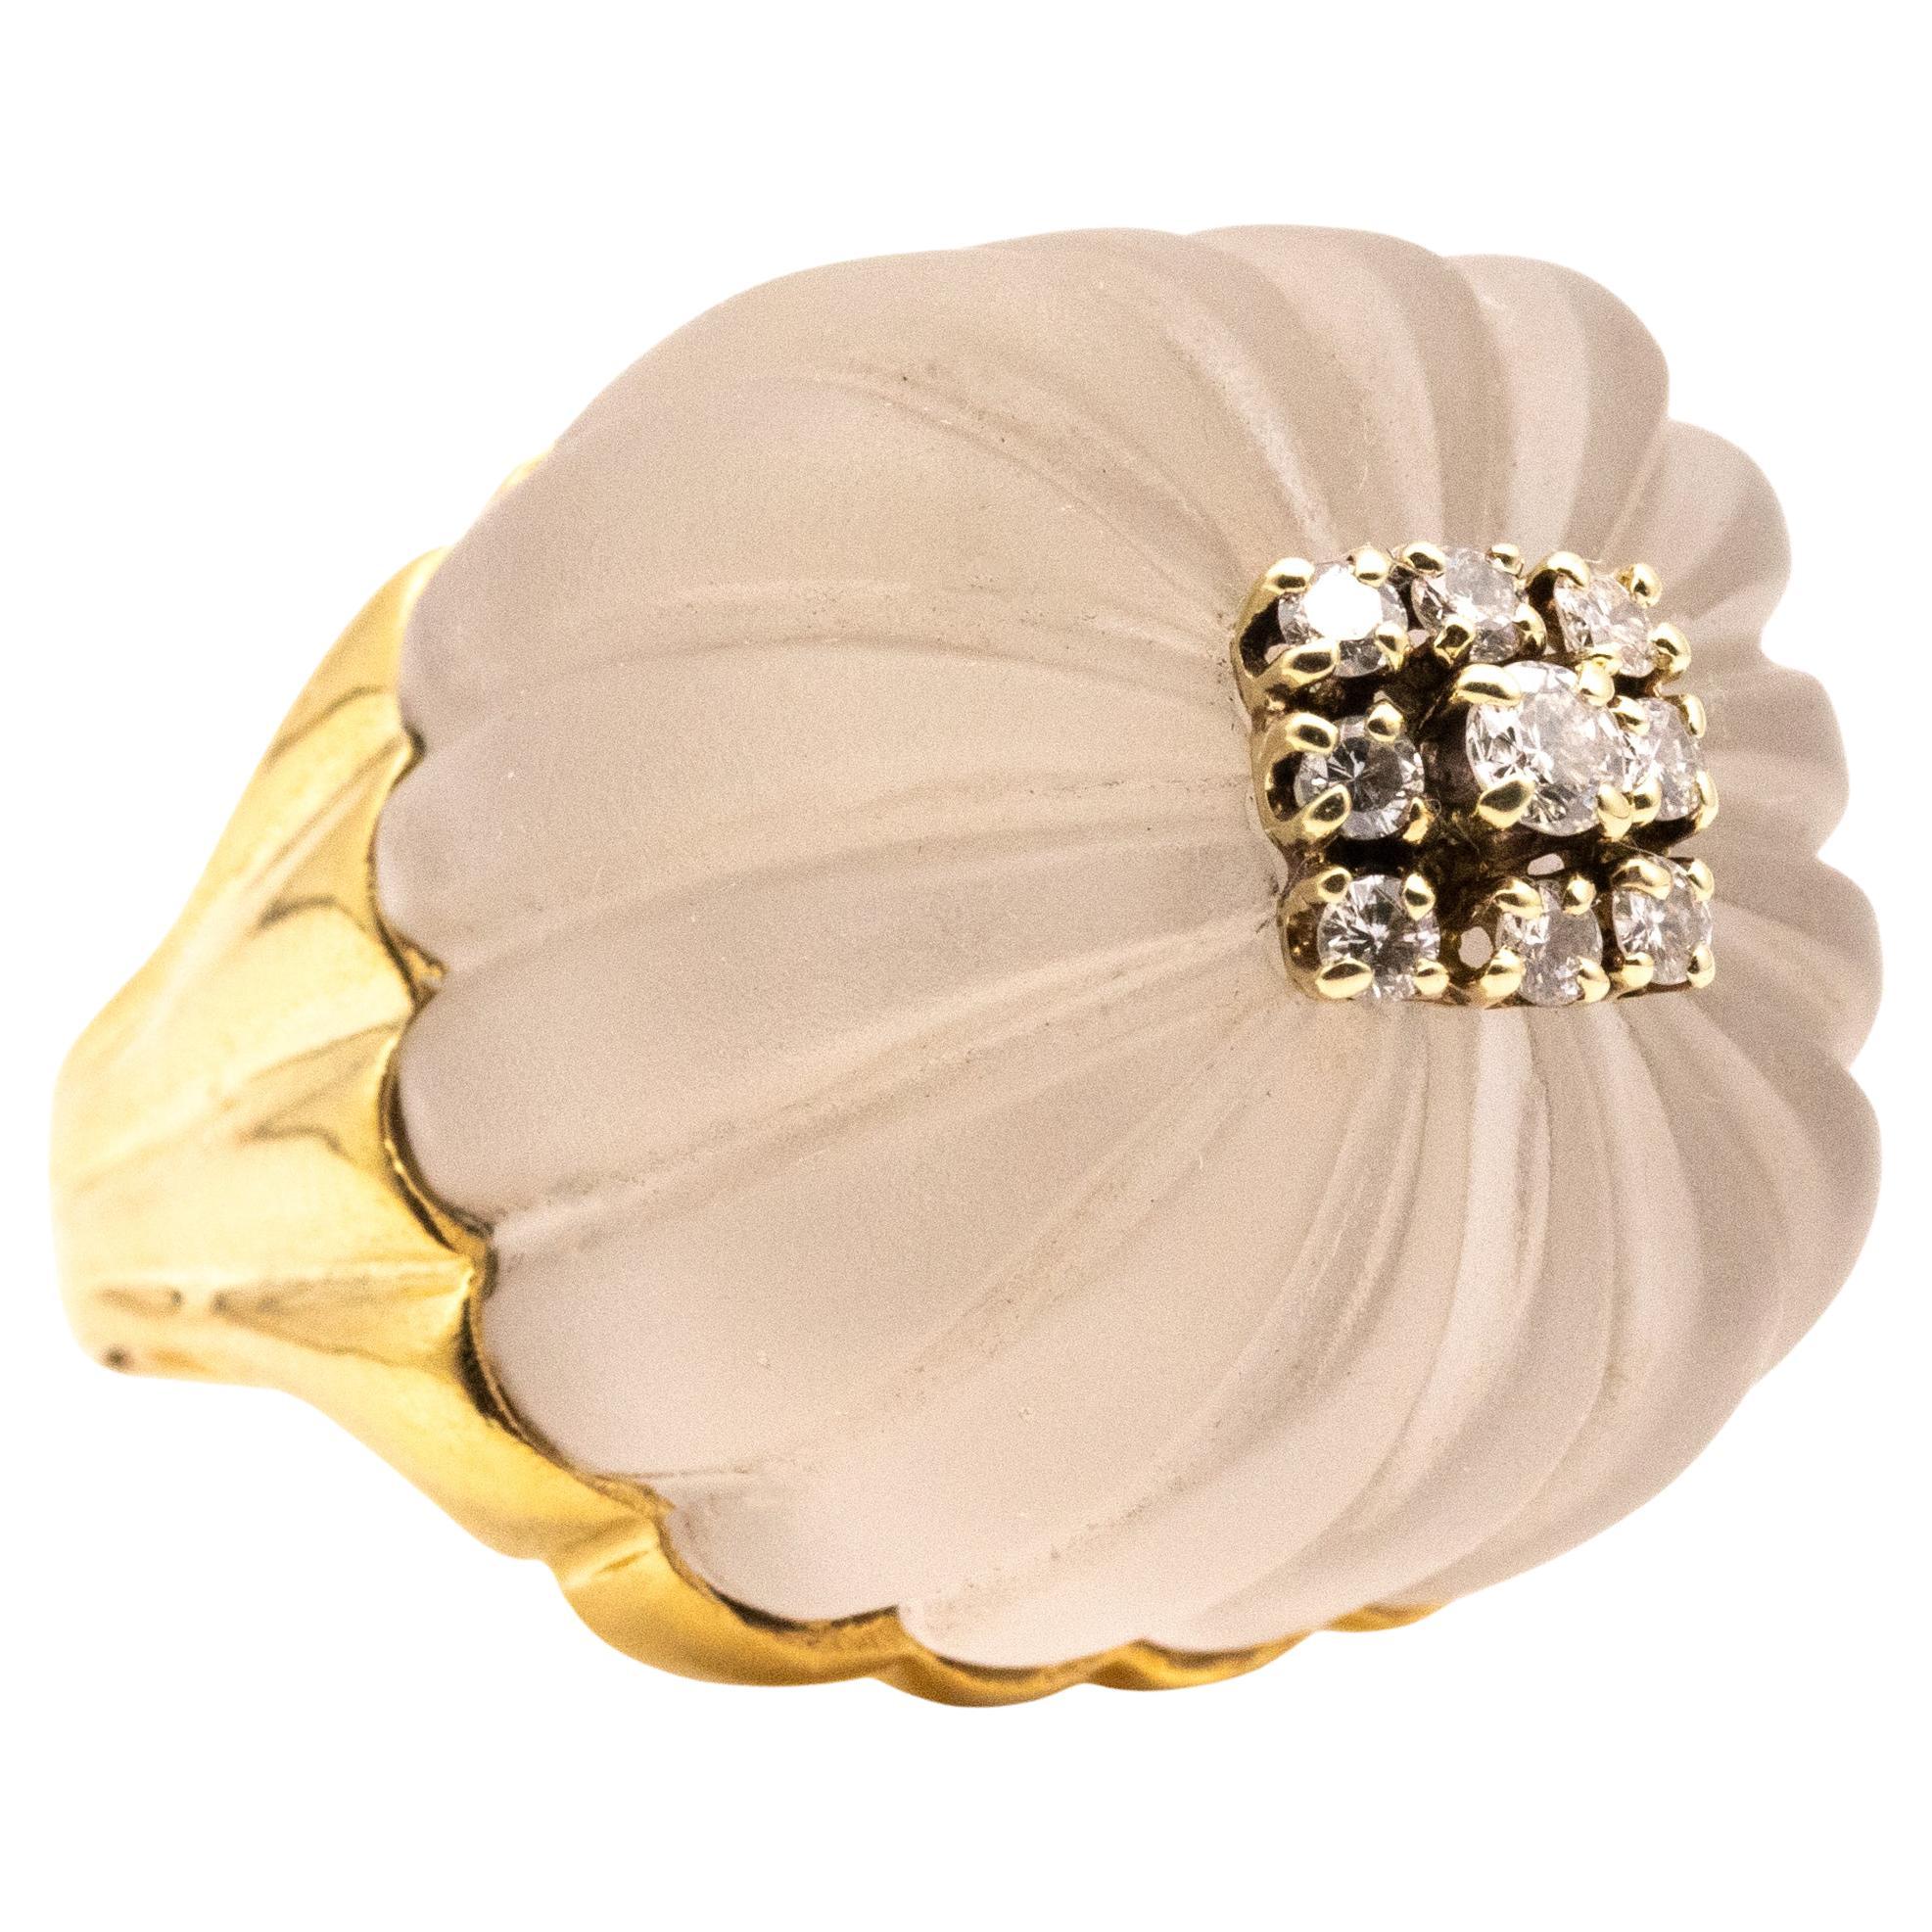 Modernist Cocktail Ring in 18kt Gold with Carved Rock Quartz and VS Diamonds